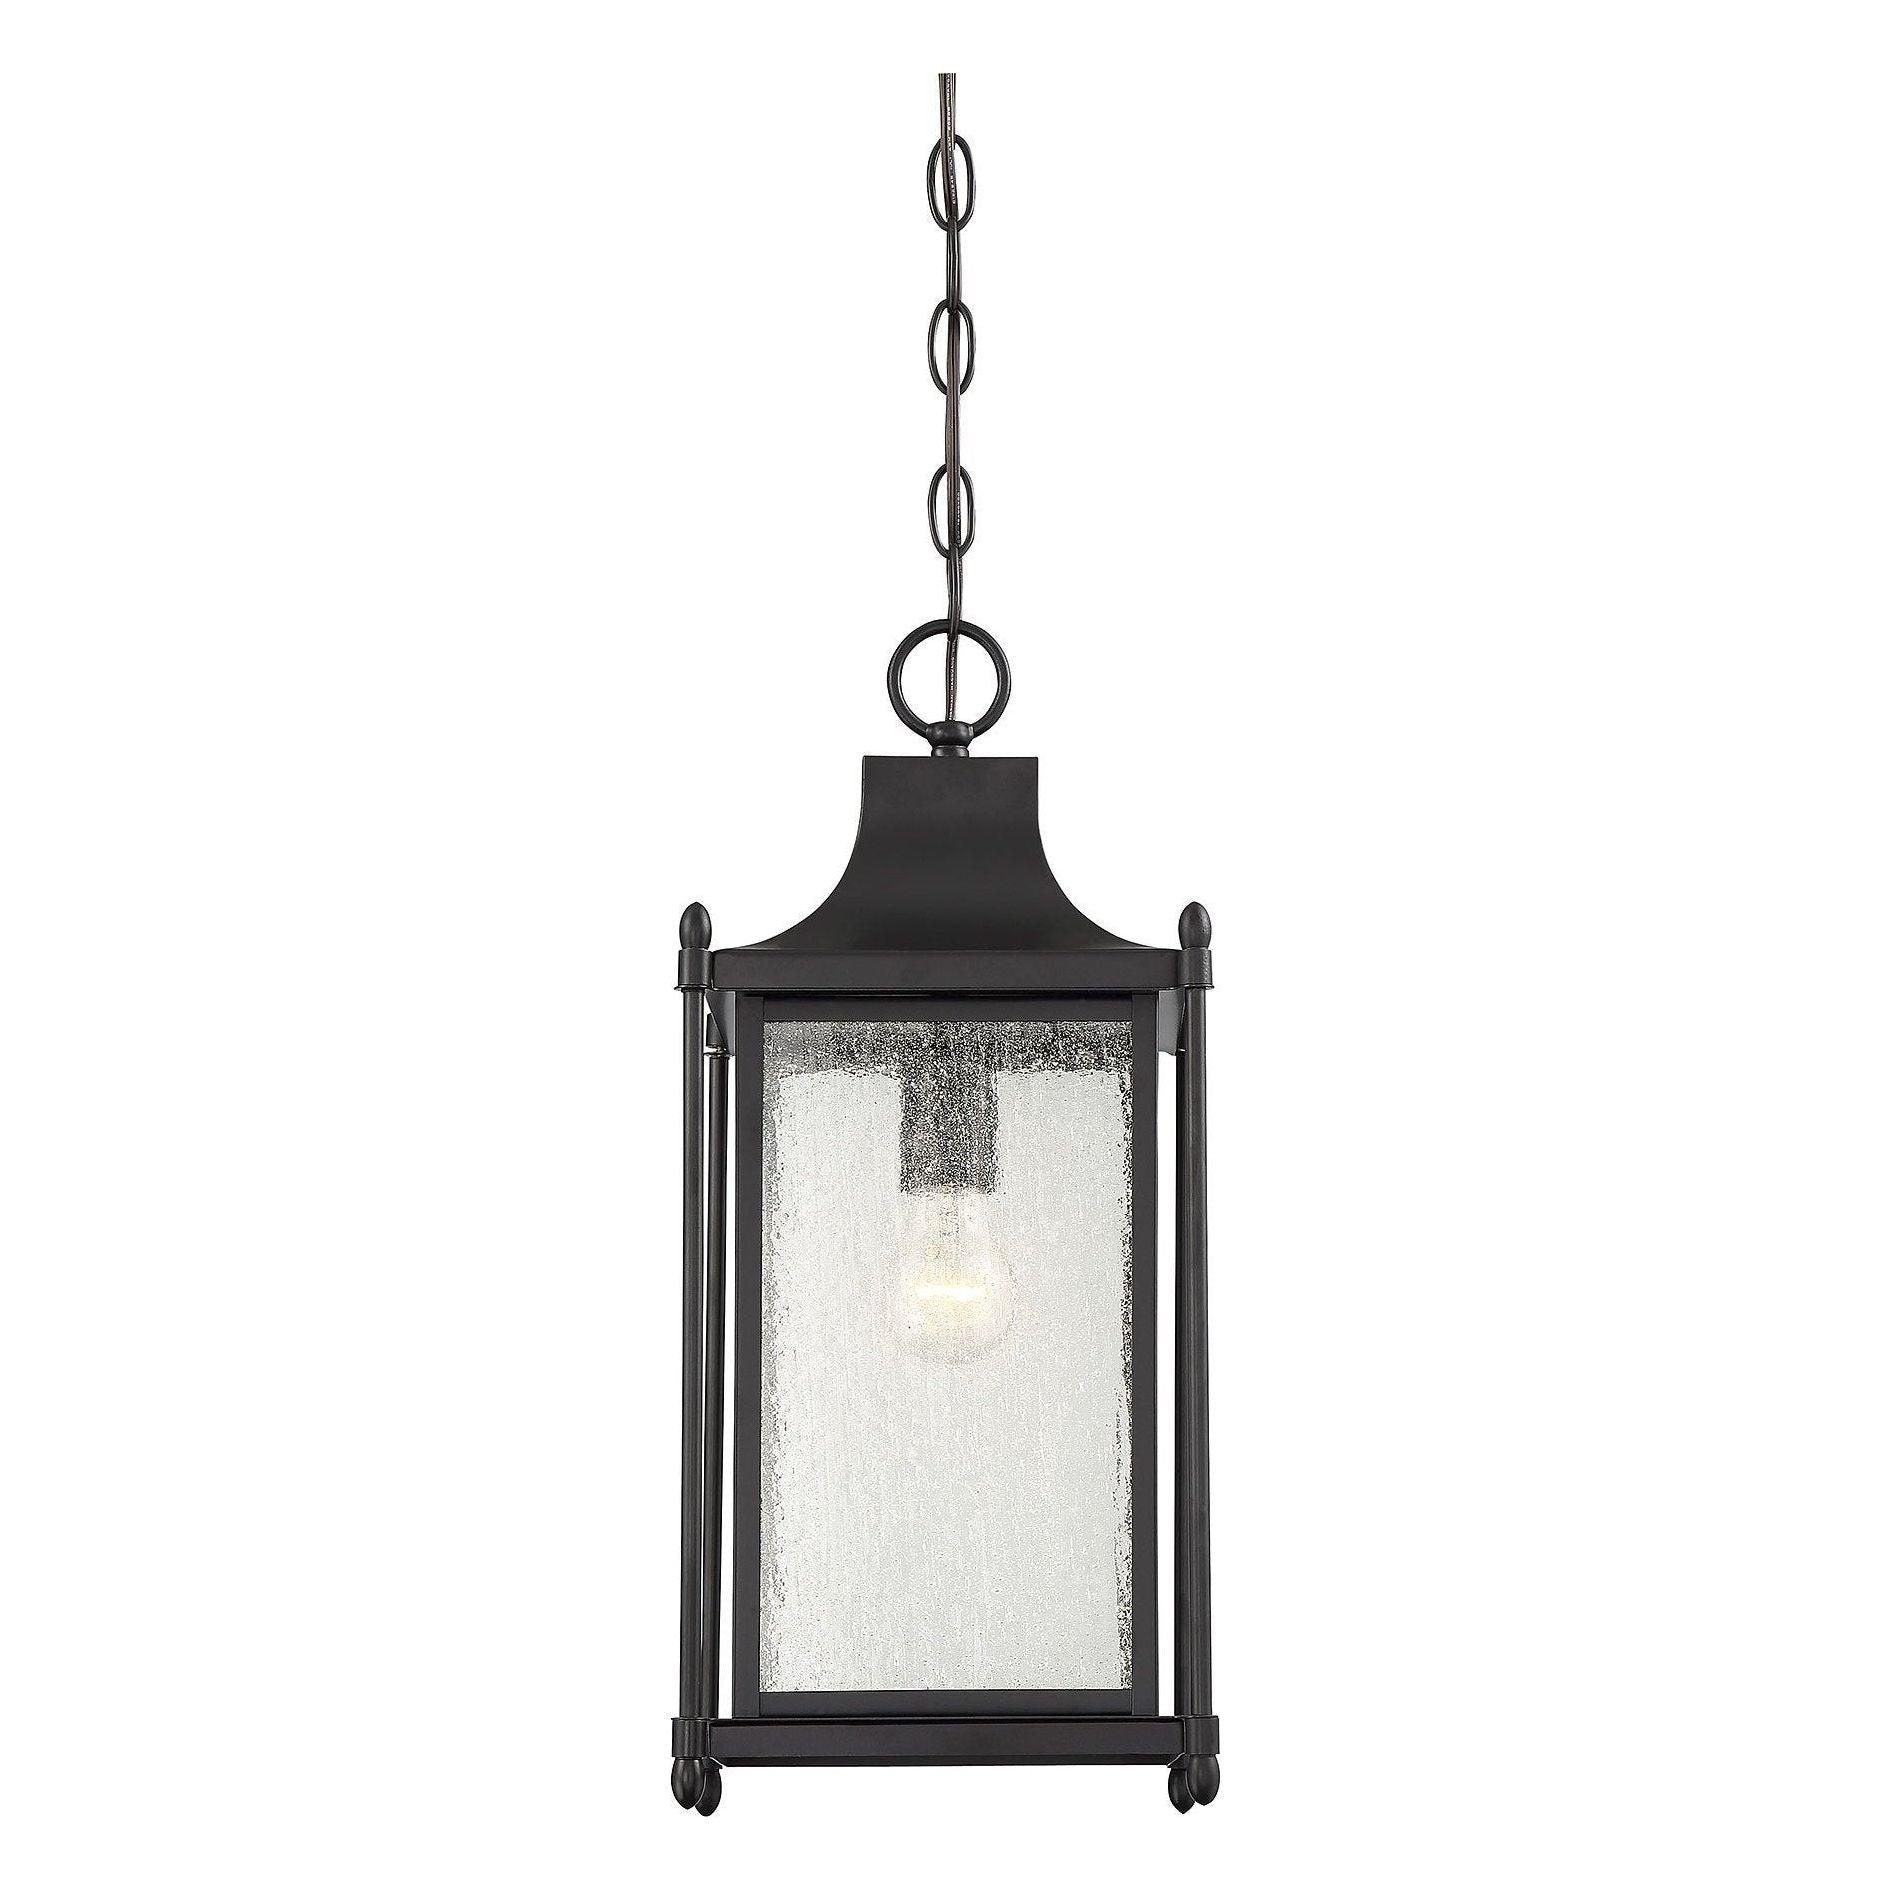 Savoy House - Dunnmore Outdoor Pendant - Lights Canada